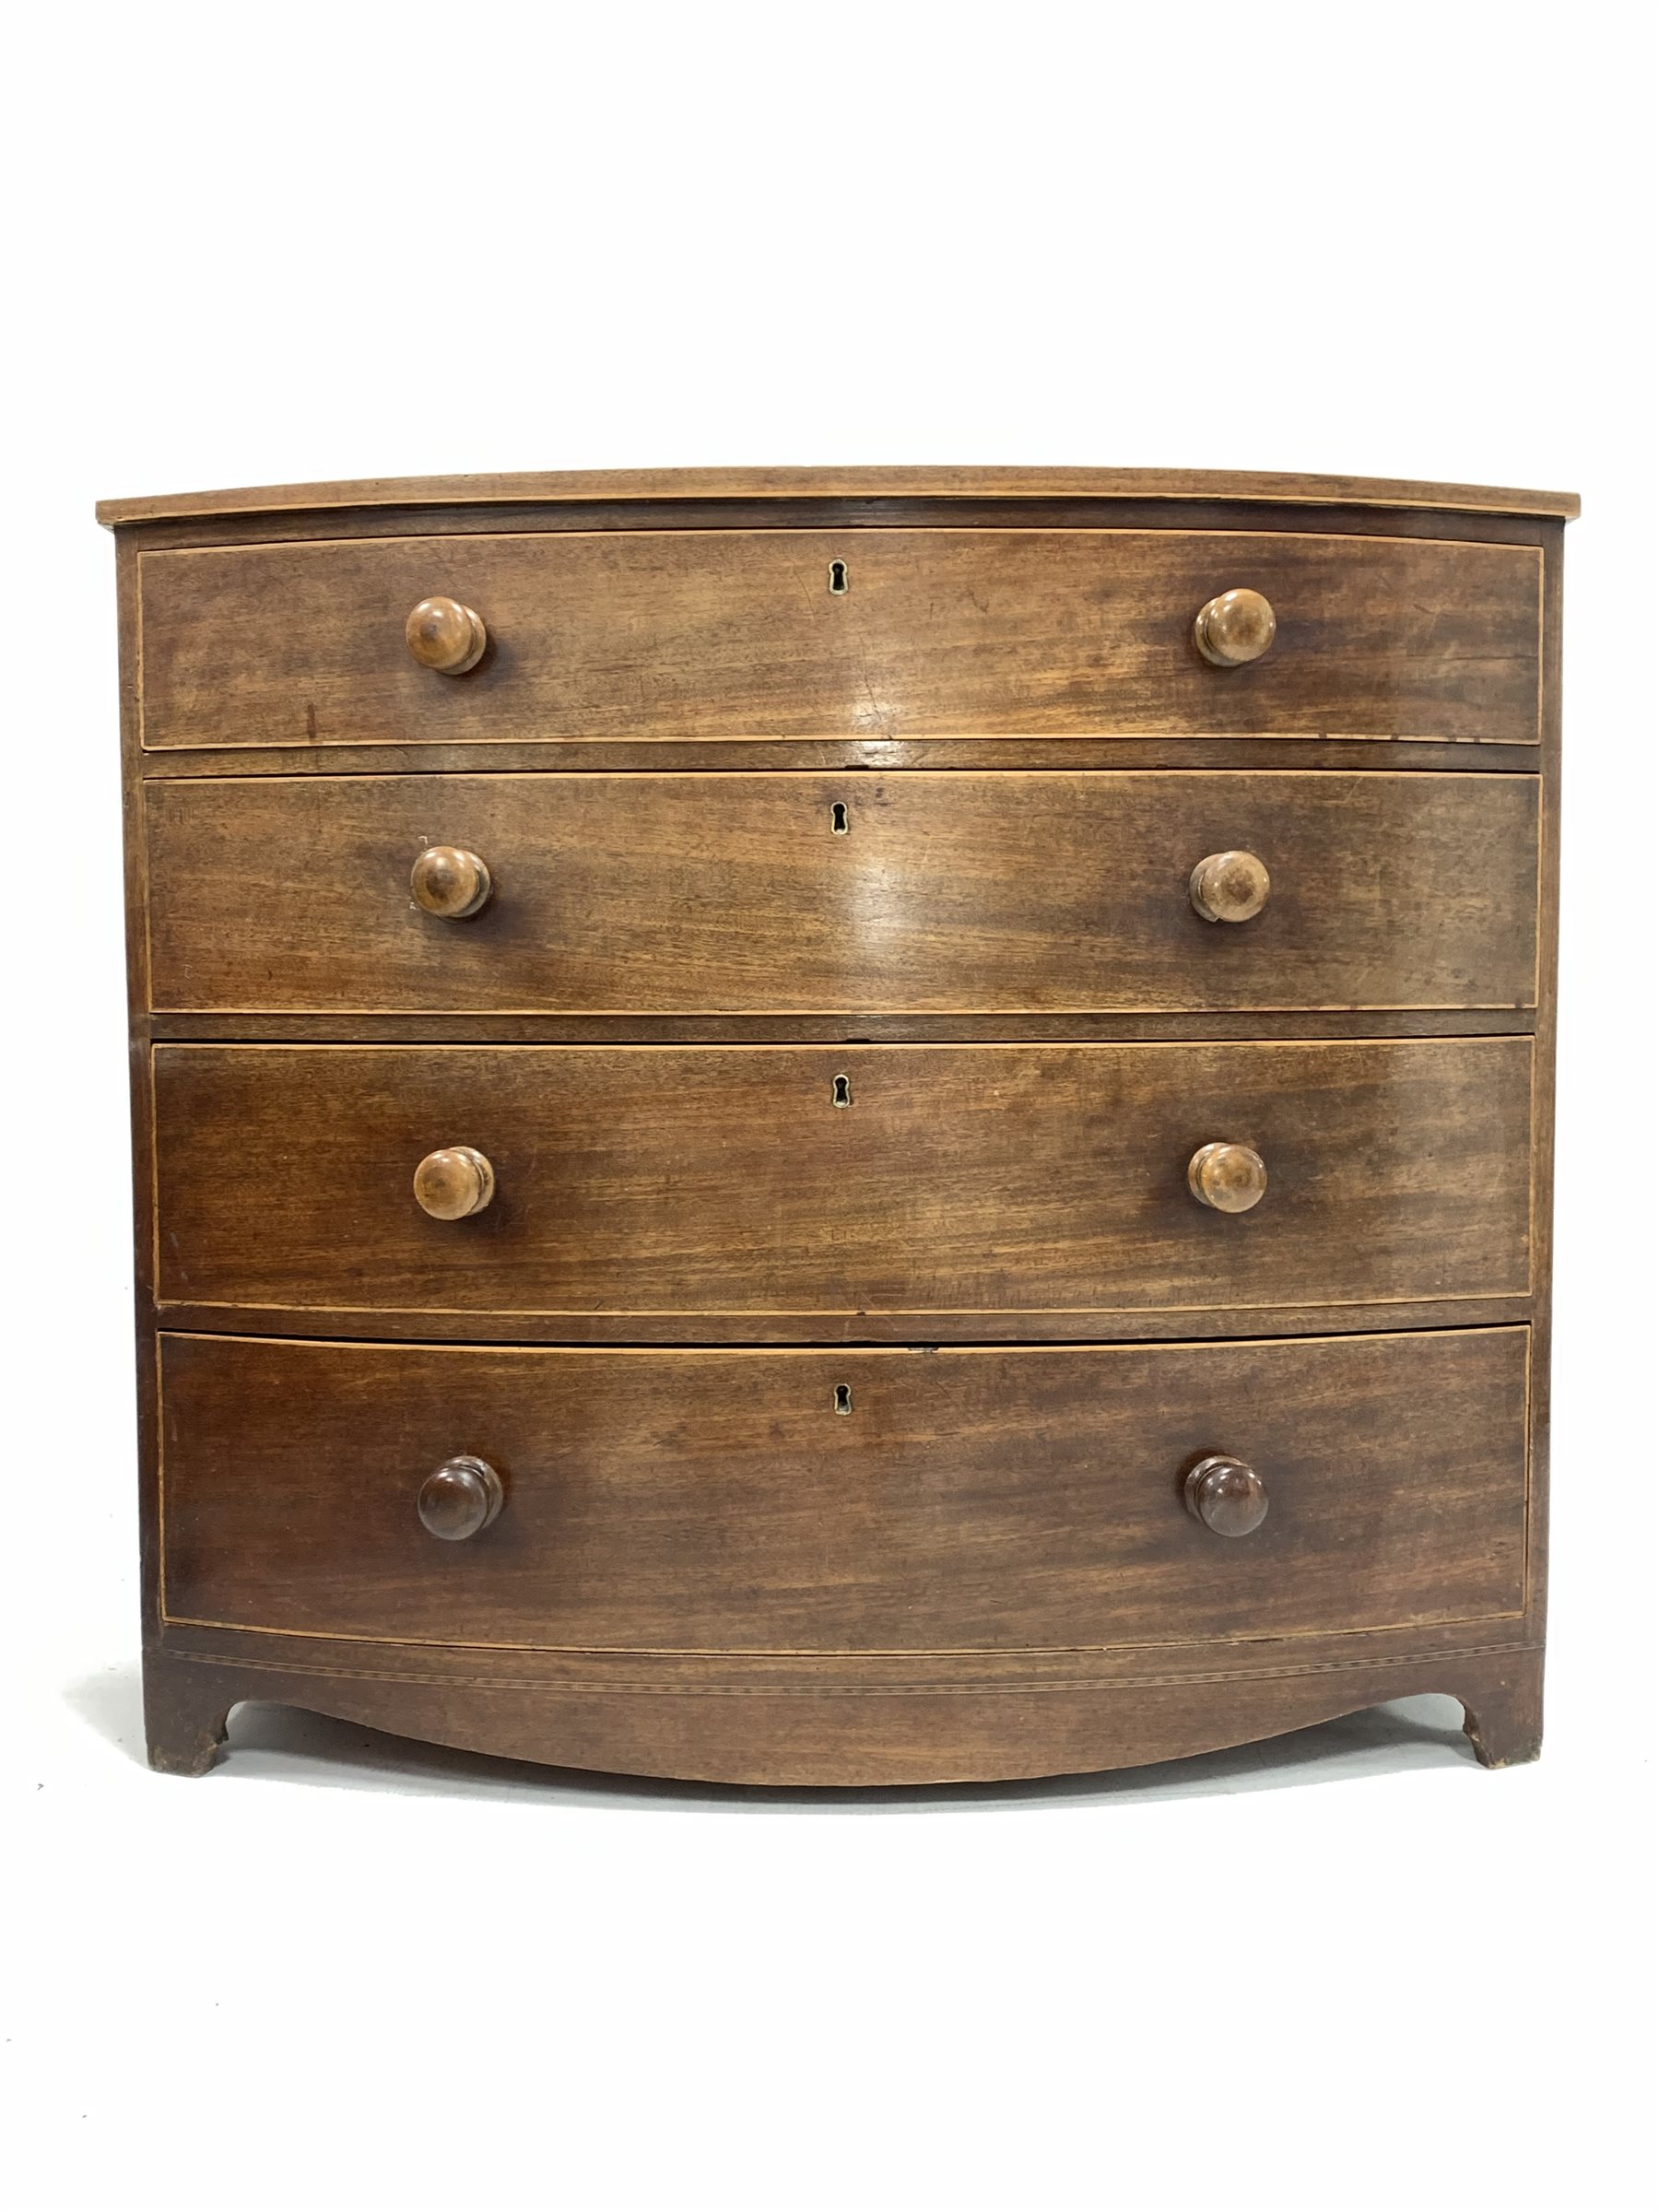 Early to mid 19th century mahogany and boxwood strung bow front chest fitted with four long graduate